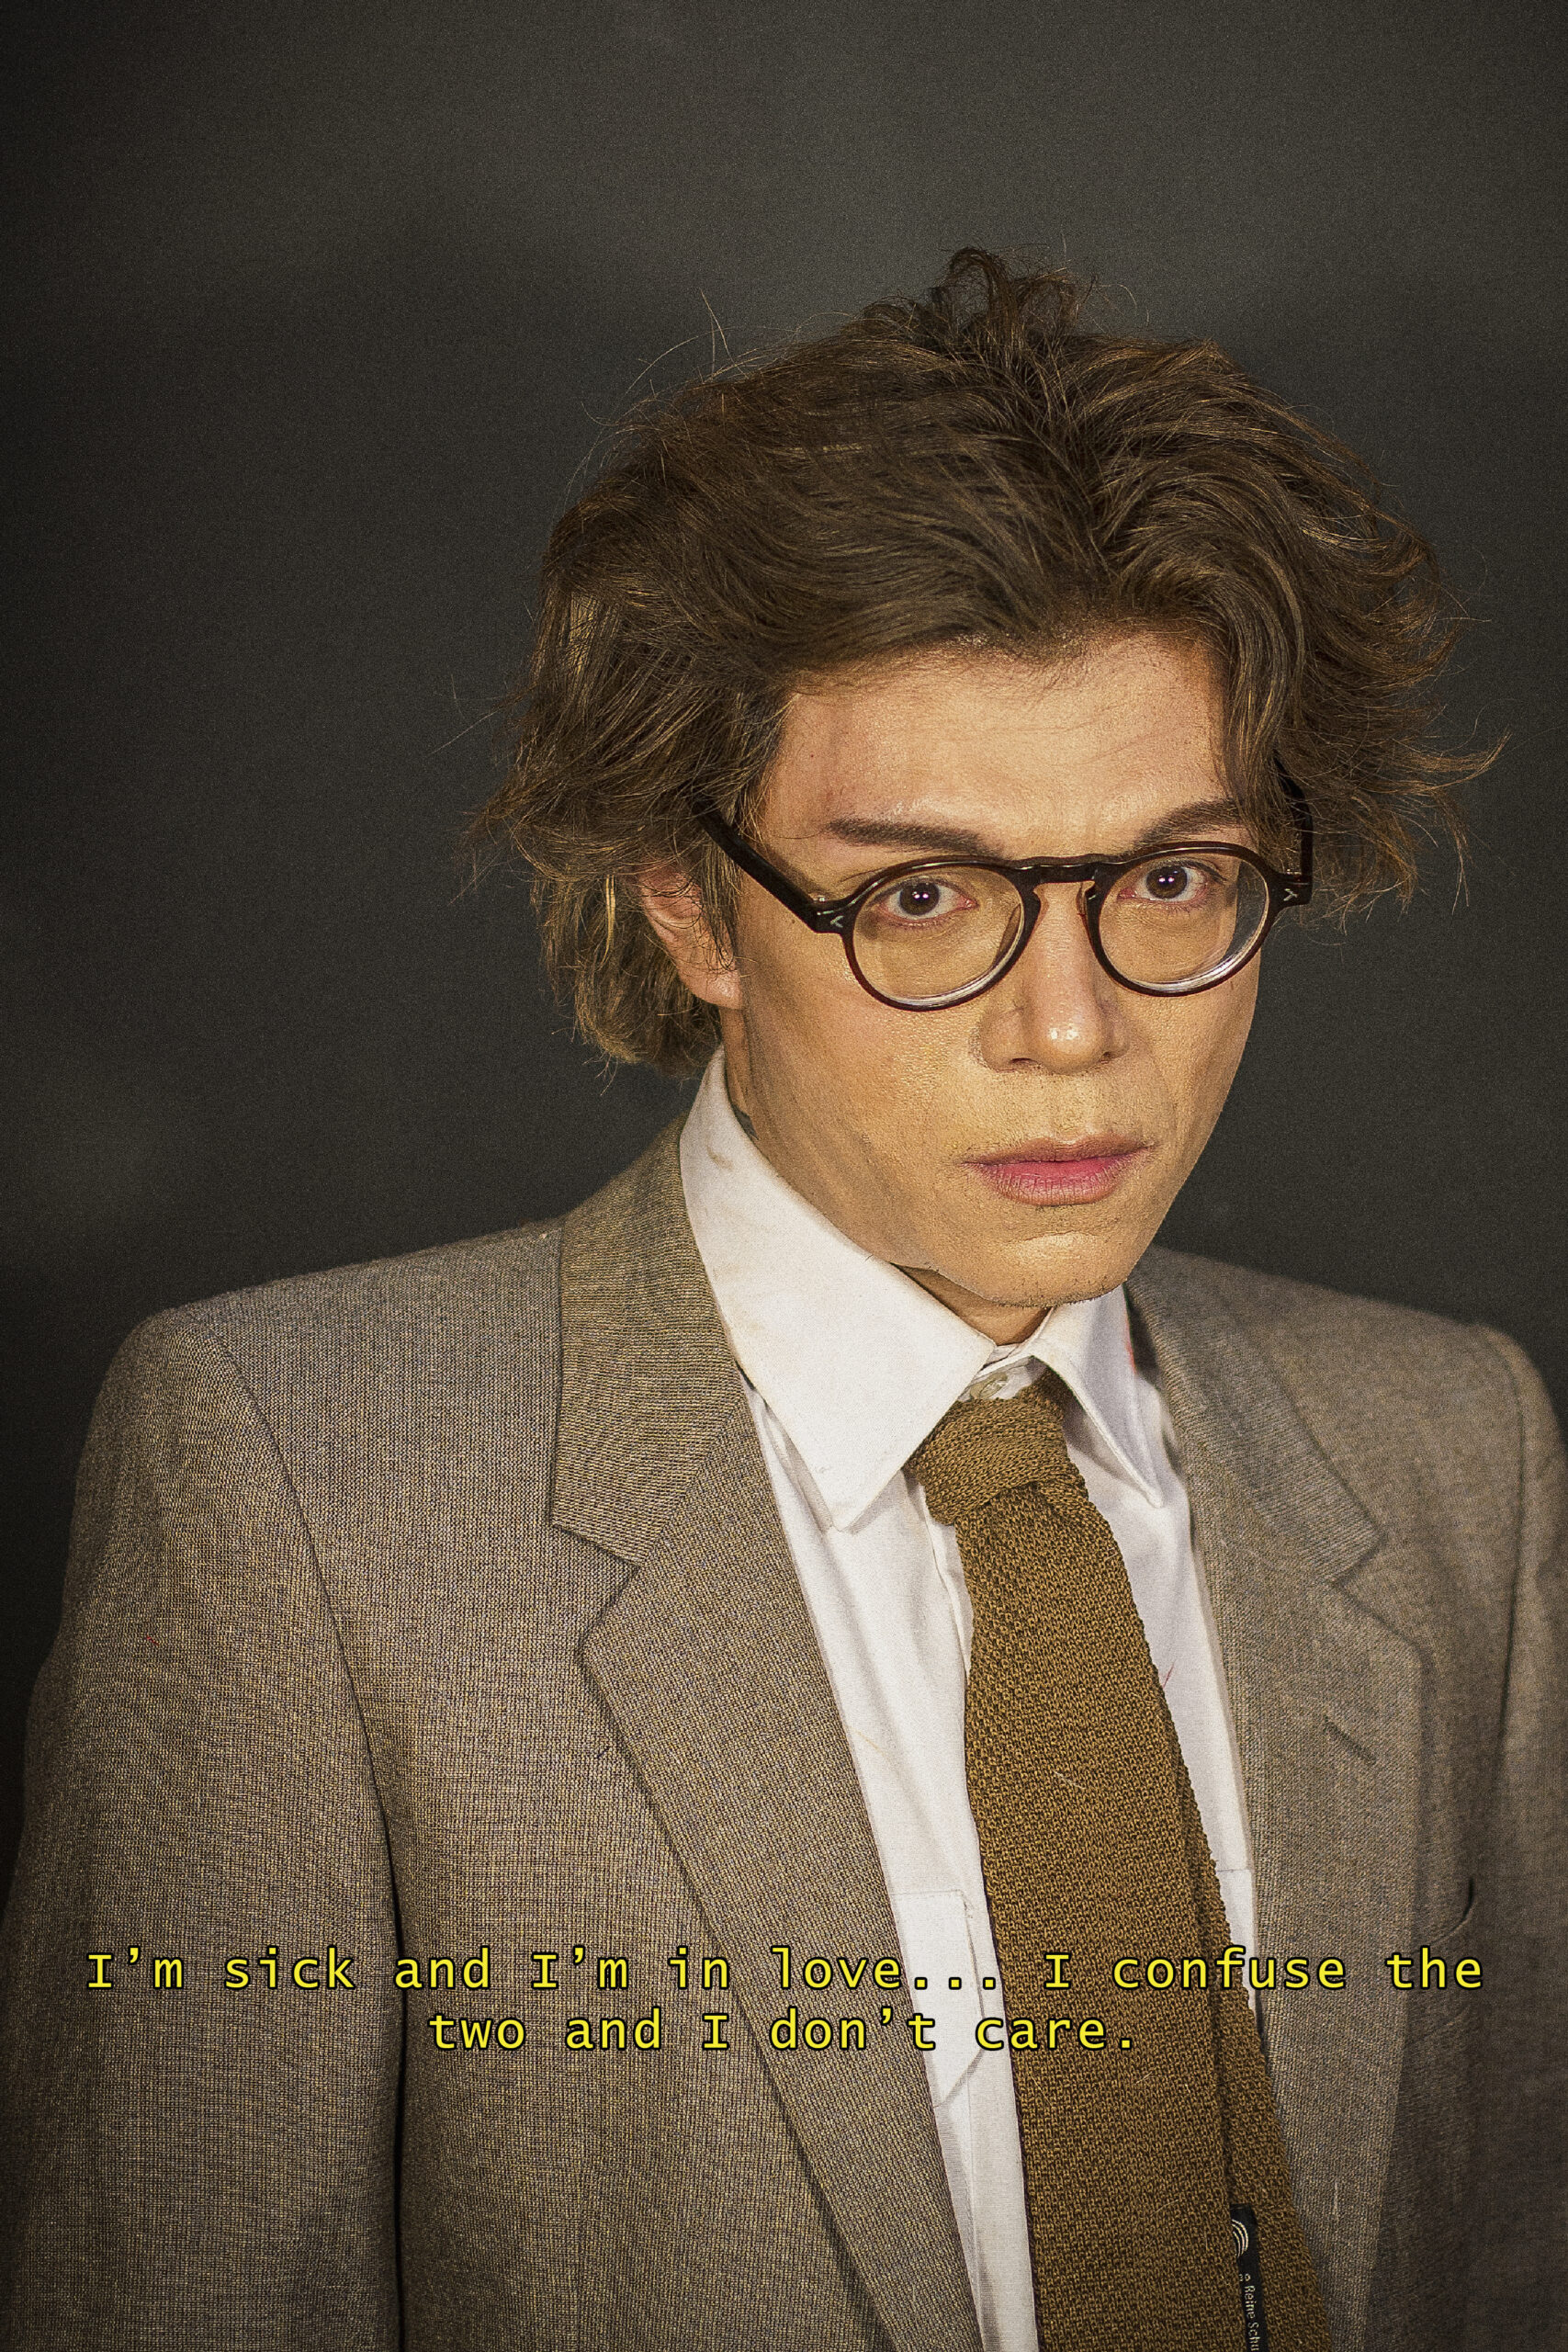 Jaime has messy brown hair and glasses. He wears a white shirt, brown knit tie and a brown blazer. At the bottom of the image, text reads "I'm sick and I'm in love... I confuse the two and I don't care."